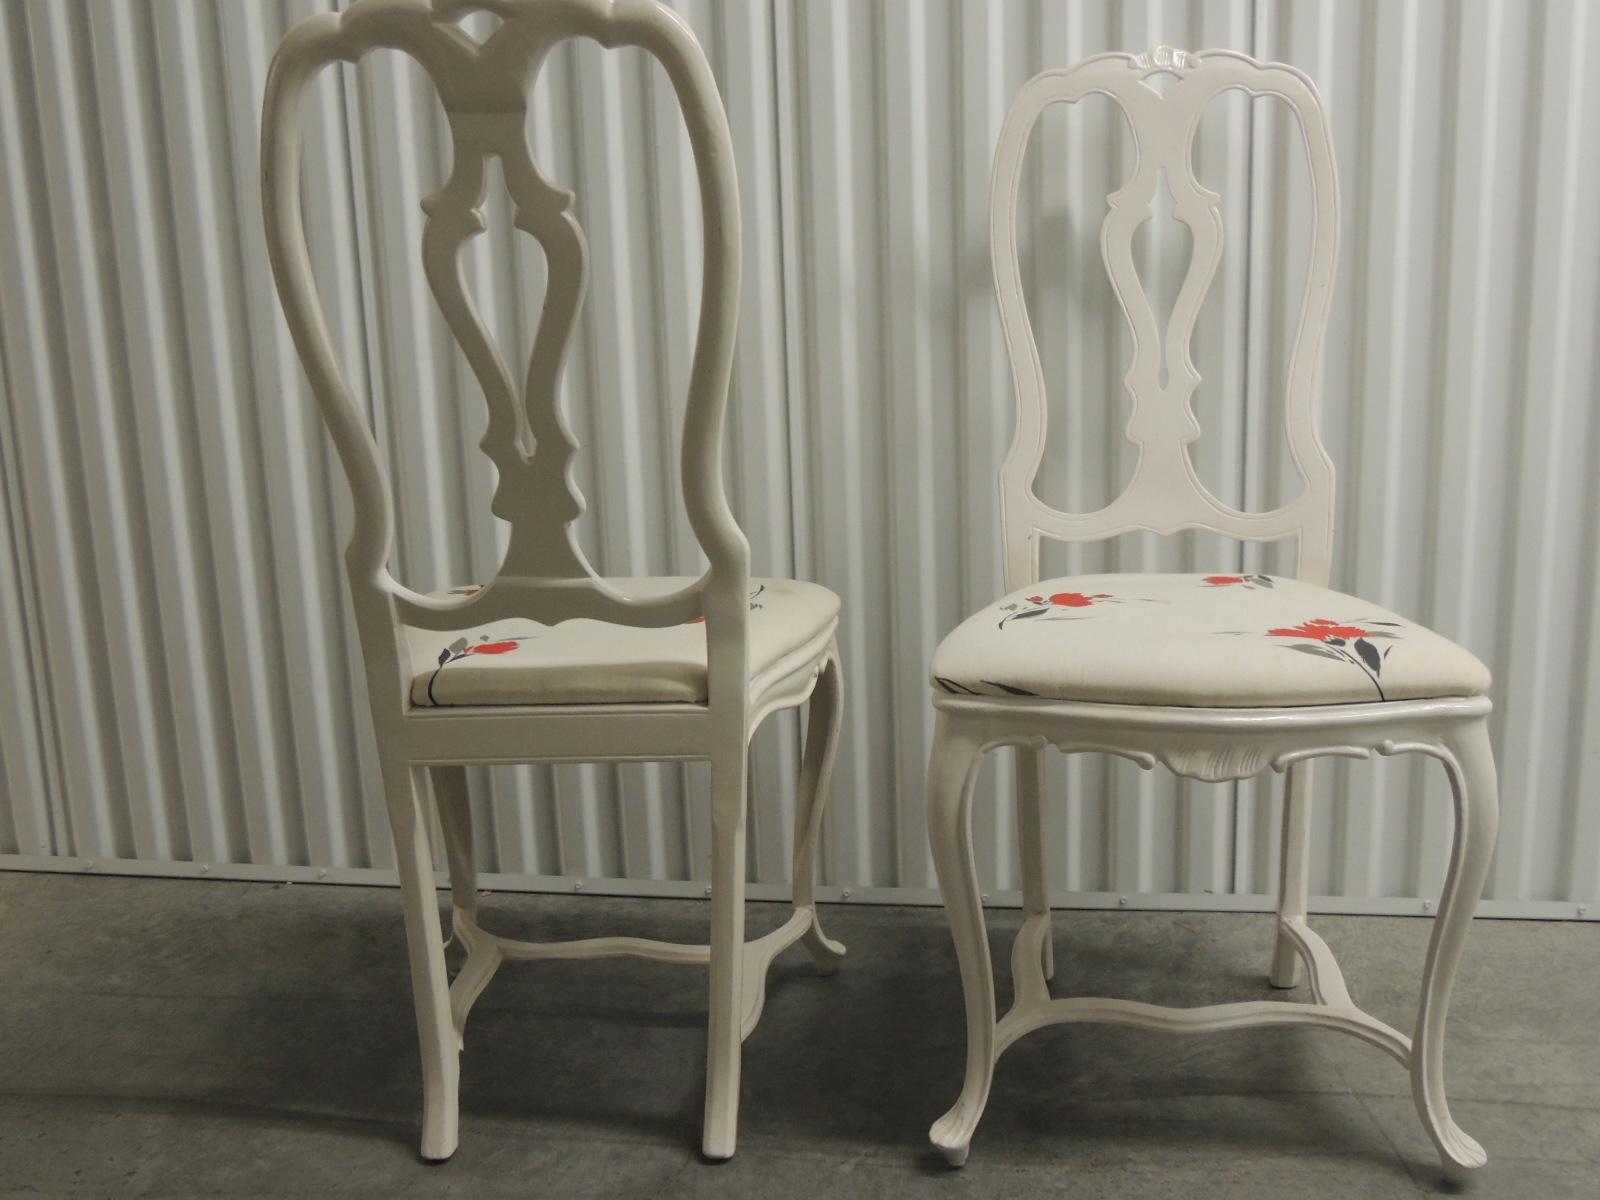 Hollywood Regency Pair of Vintage White High-Gloss Metal Chairs with Traditional Frames